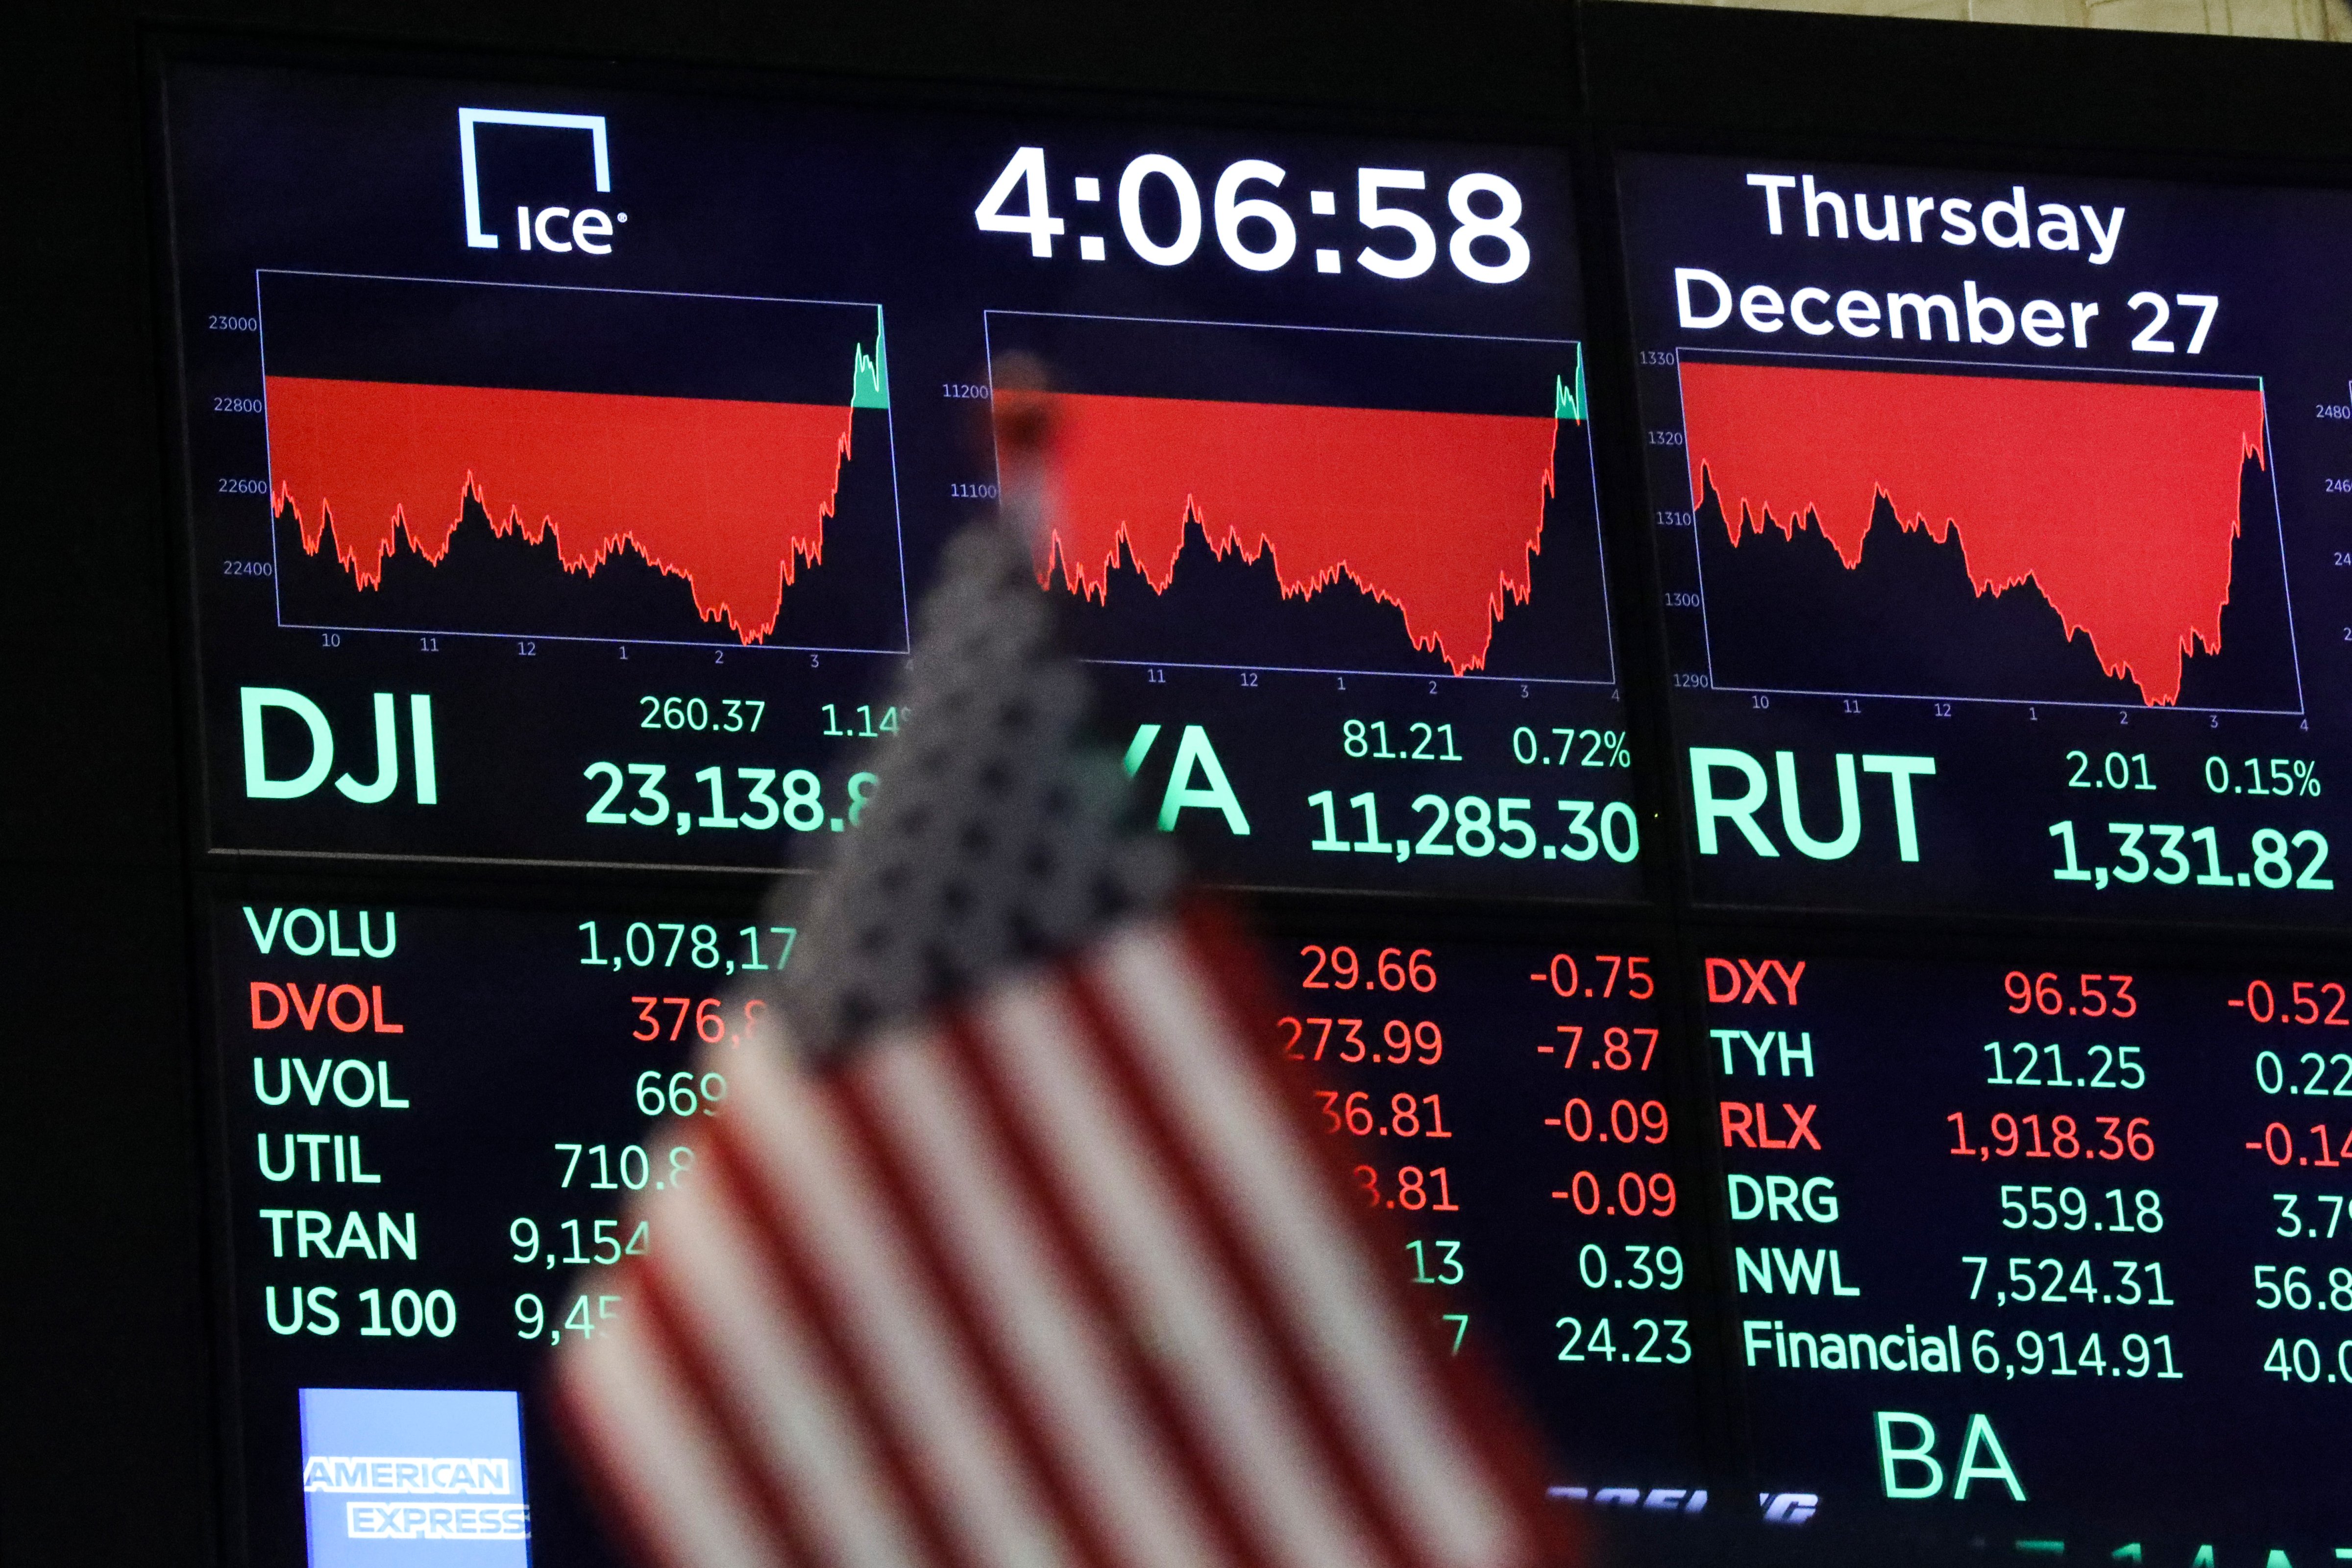 One Day After Record Gains, Markets Return To Familiar Volatility